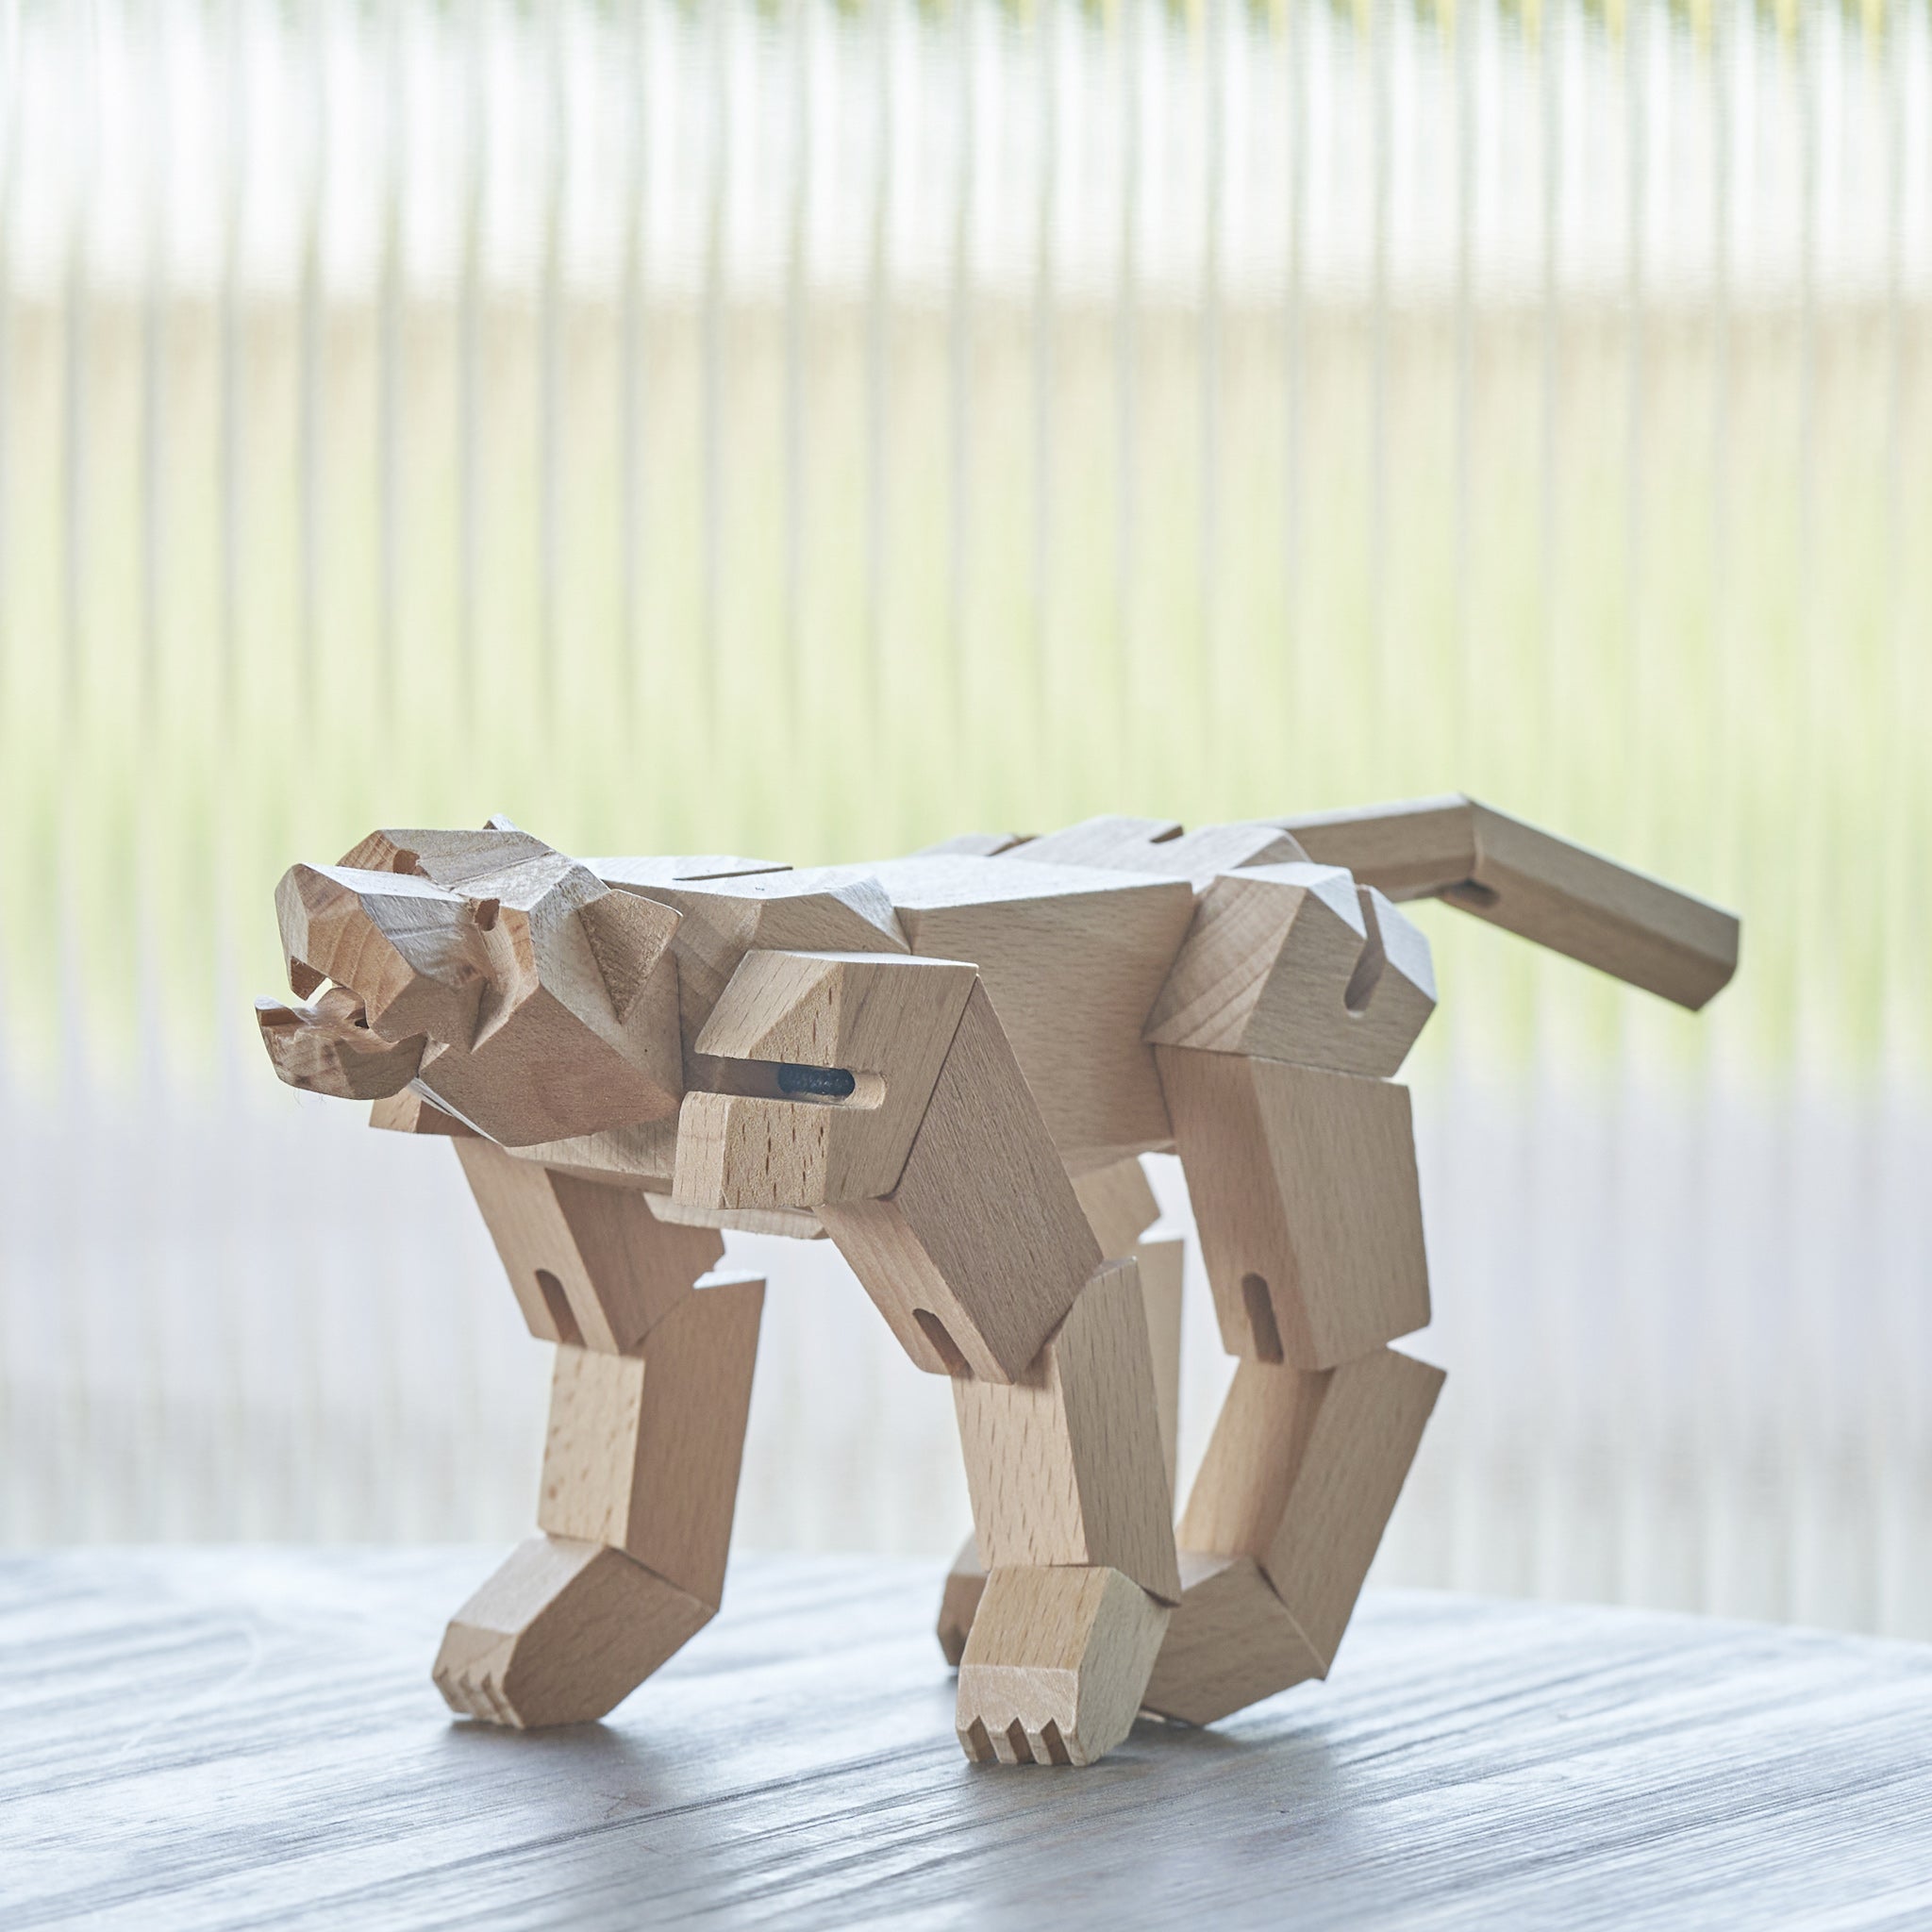 Morphits ® Tiger Wooden Toy: Roaring Adventures Await in our Wooden Playset - Yoshiaki Ito Design Stand N5